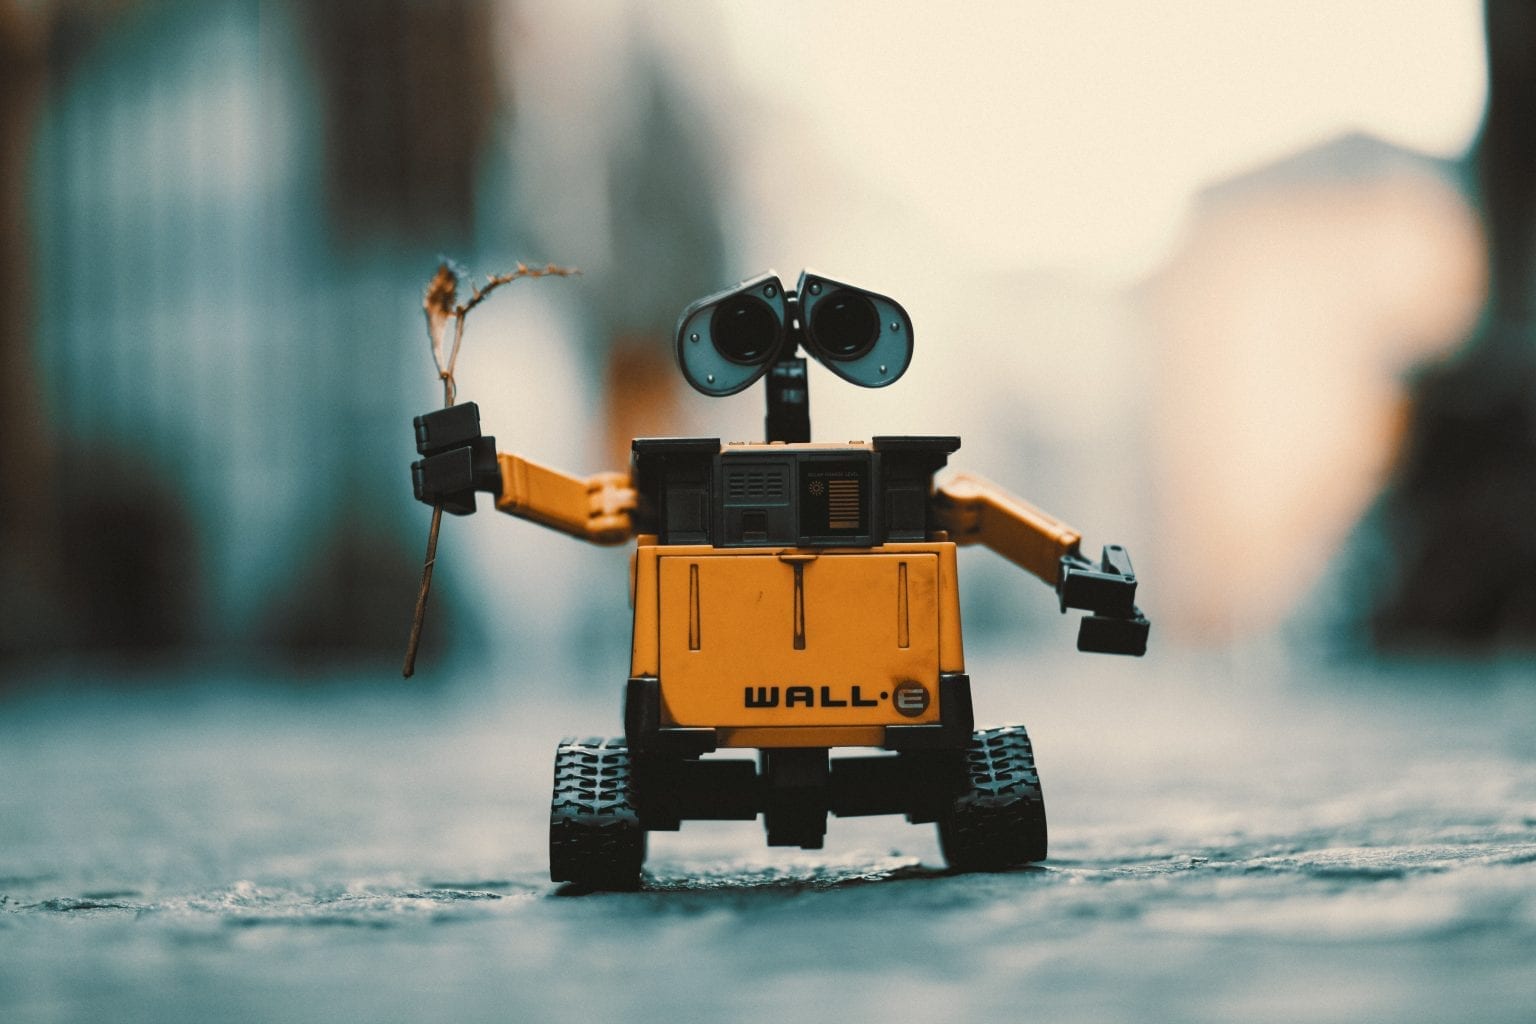 Photo of a Wall-E toy robot holding a leaf